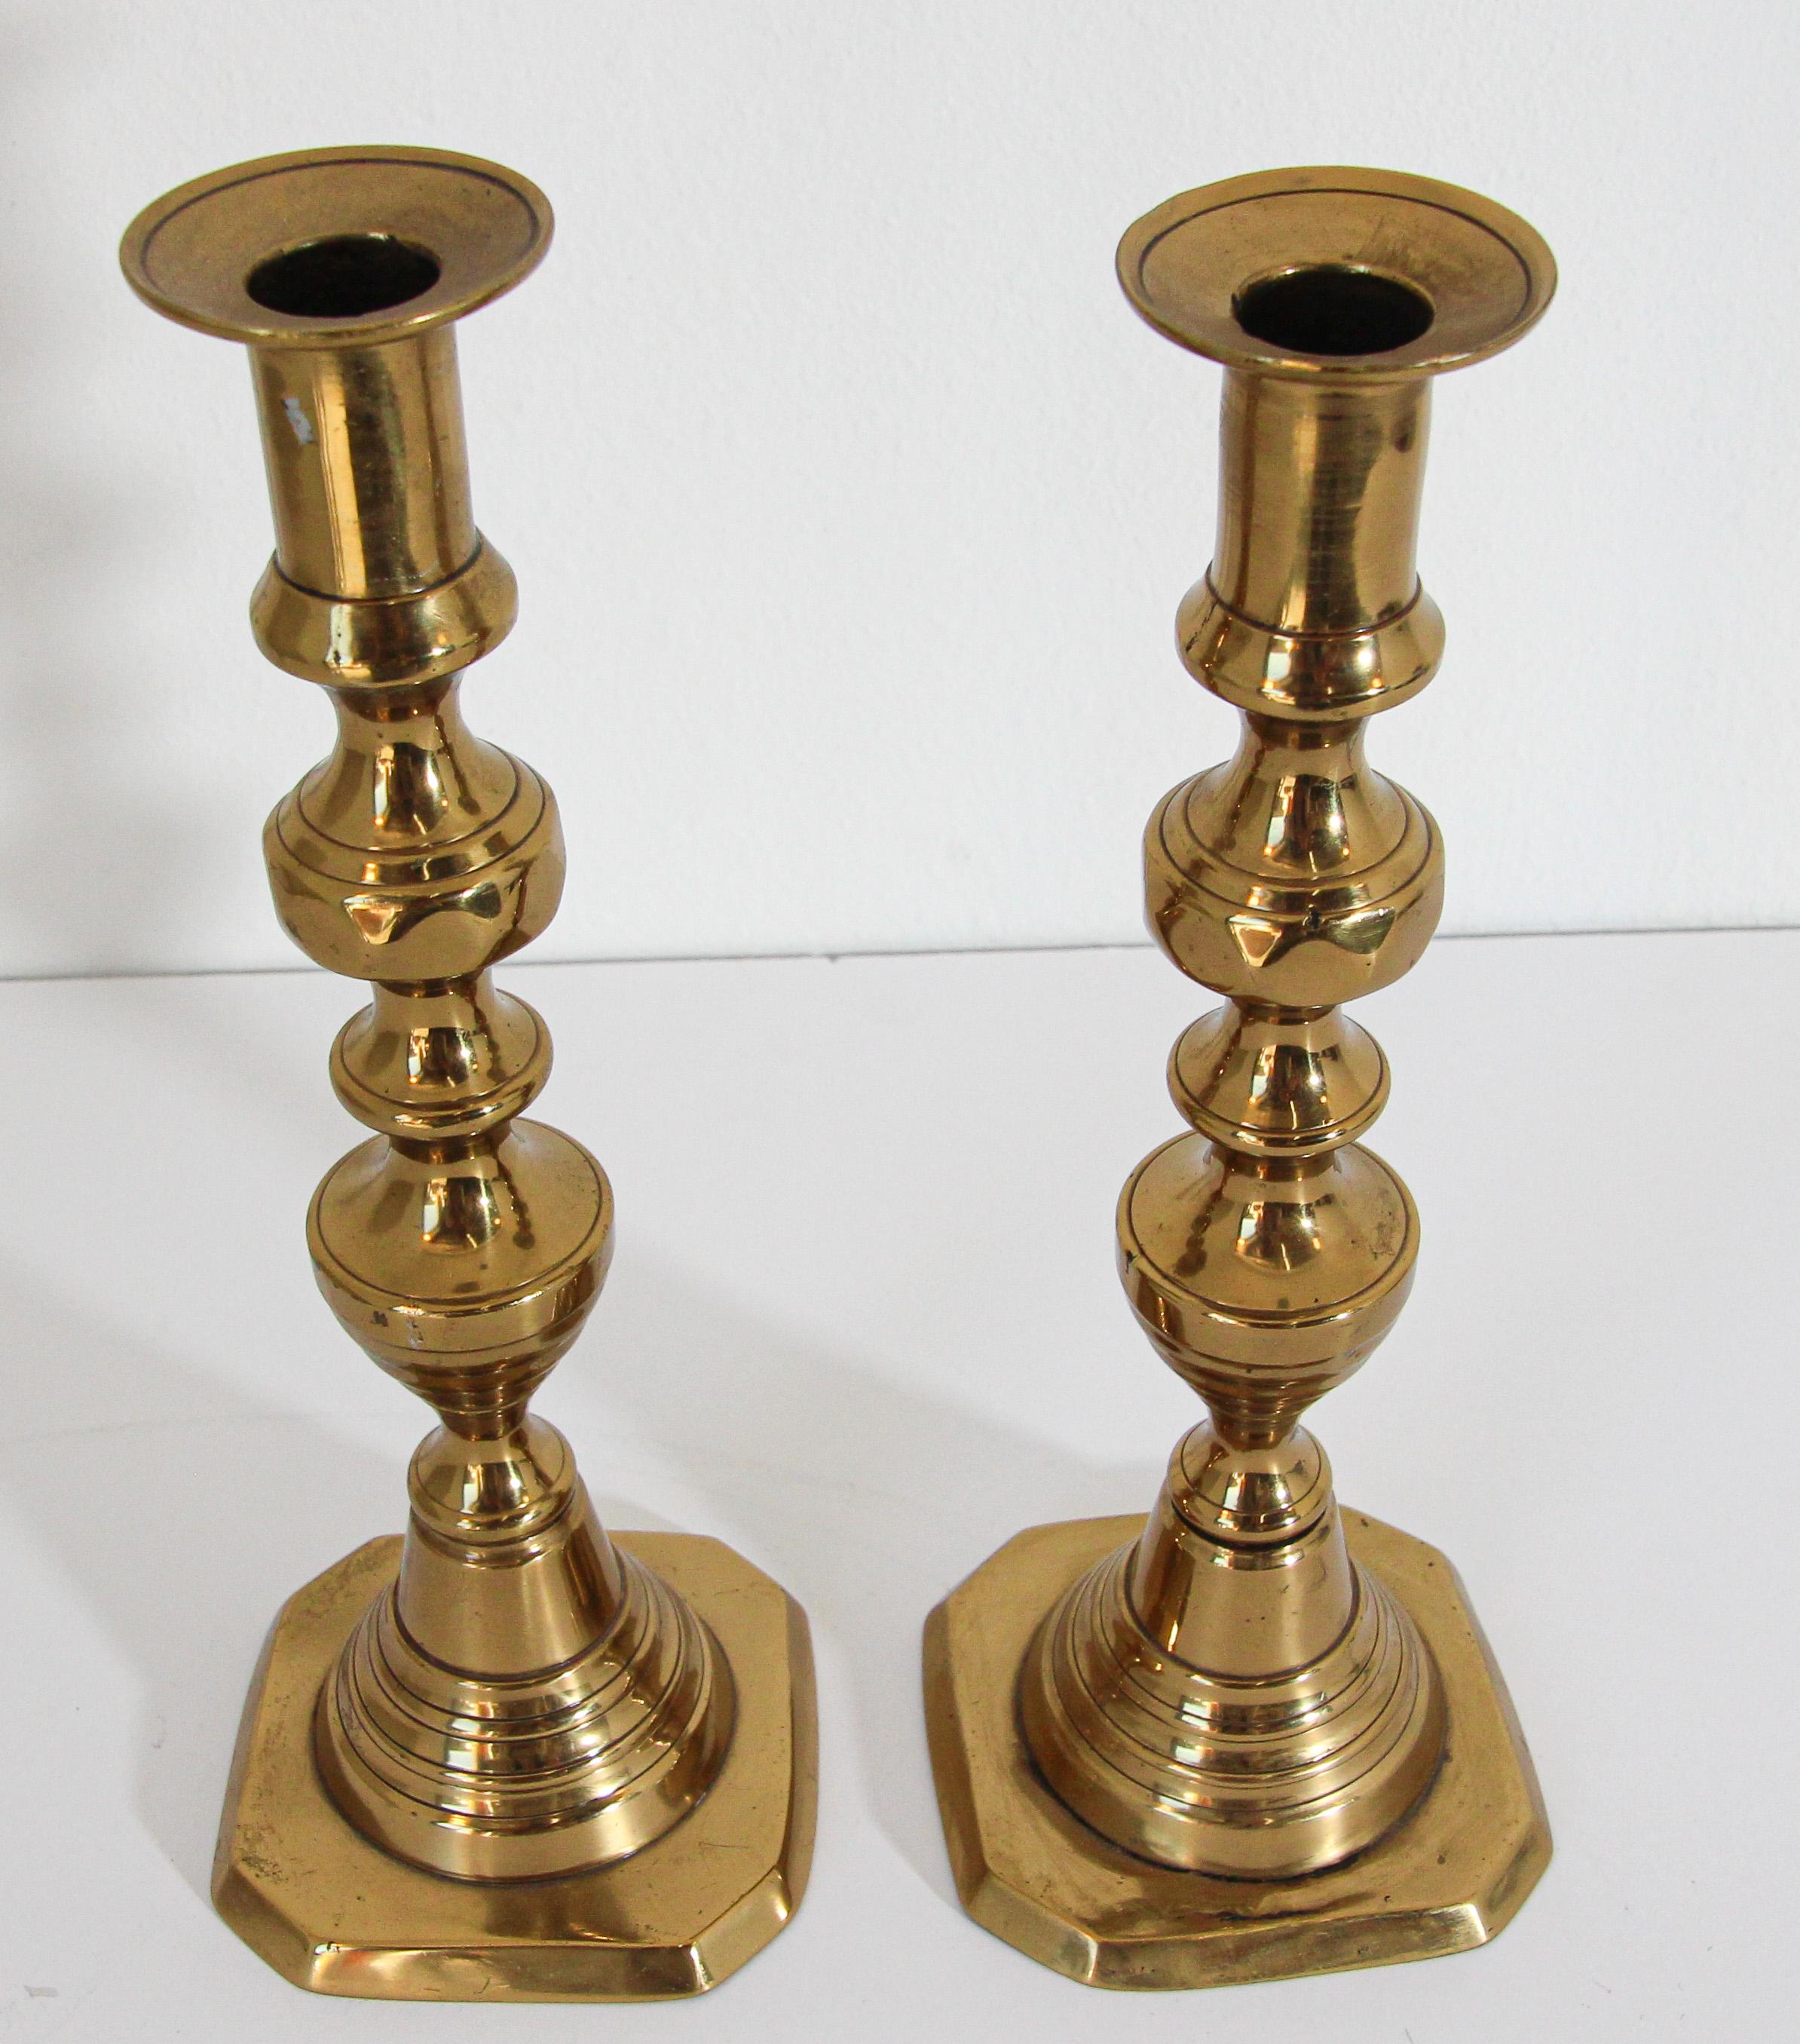 Polished 19th C. Pair of Victorian English Brass Beehive Candlesticks For Sale